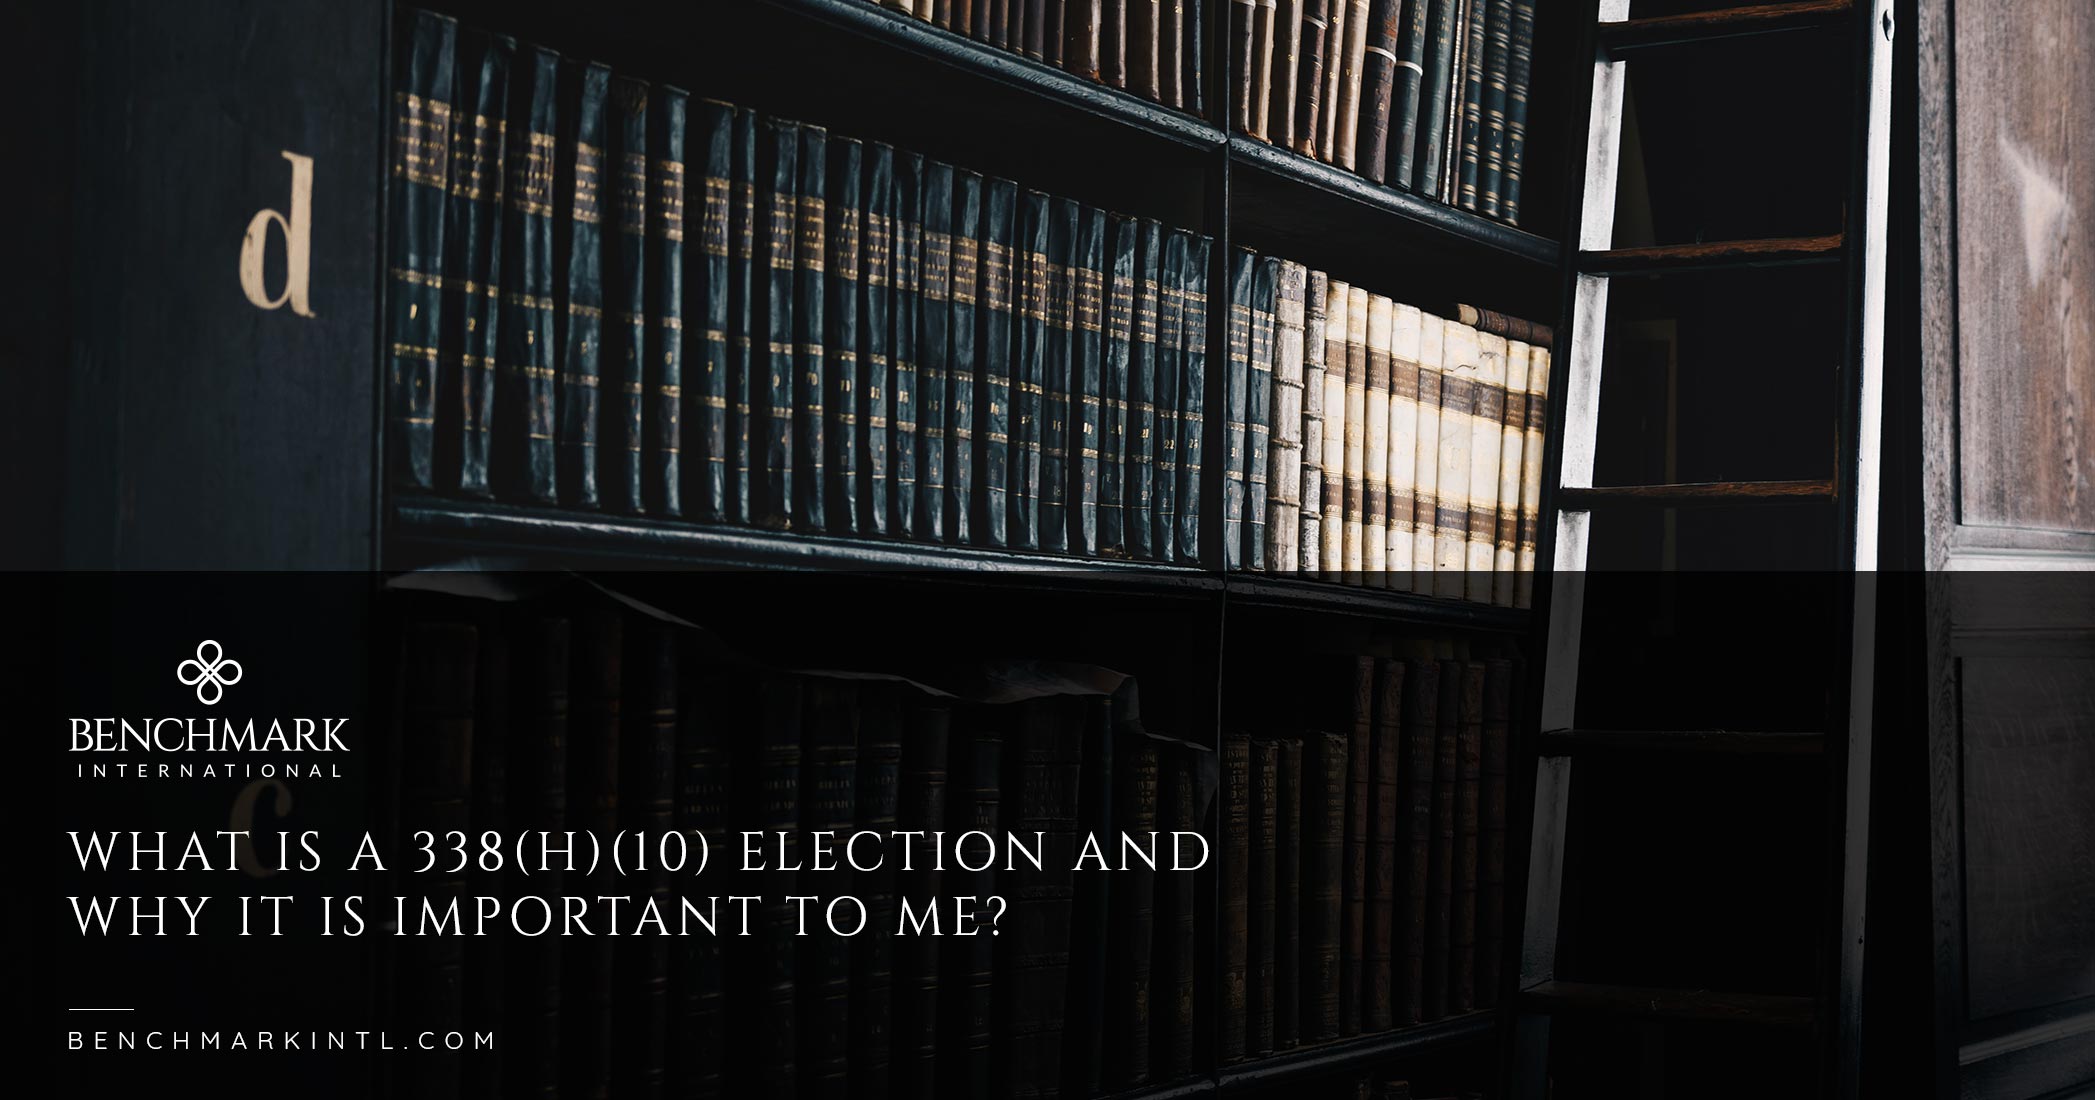 What Is A 338(H)(10) Election And Why It Is Important To Me?